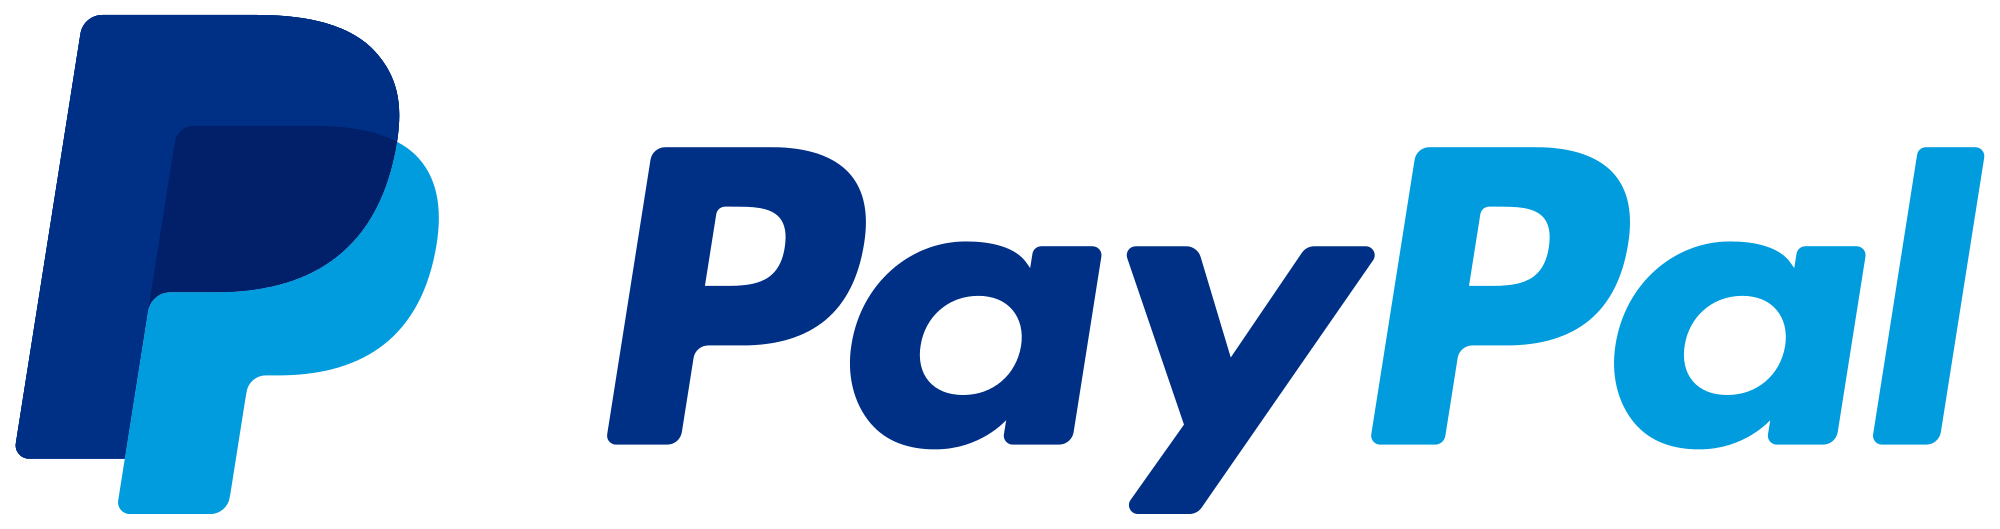 Paypal-logo-bestsecuritysearch